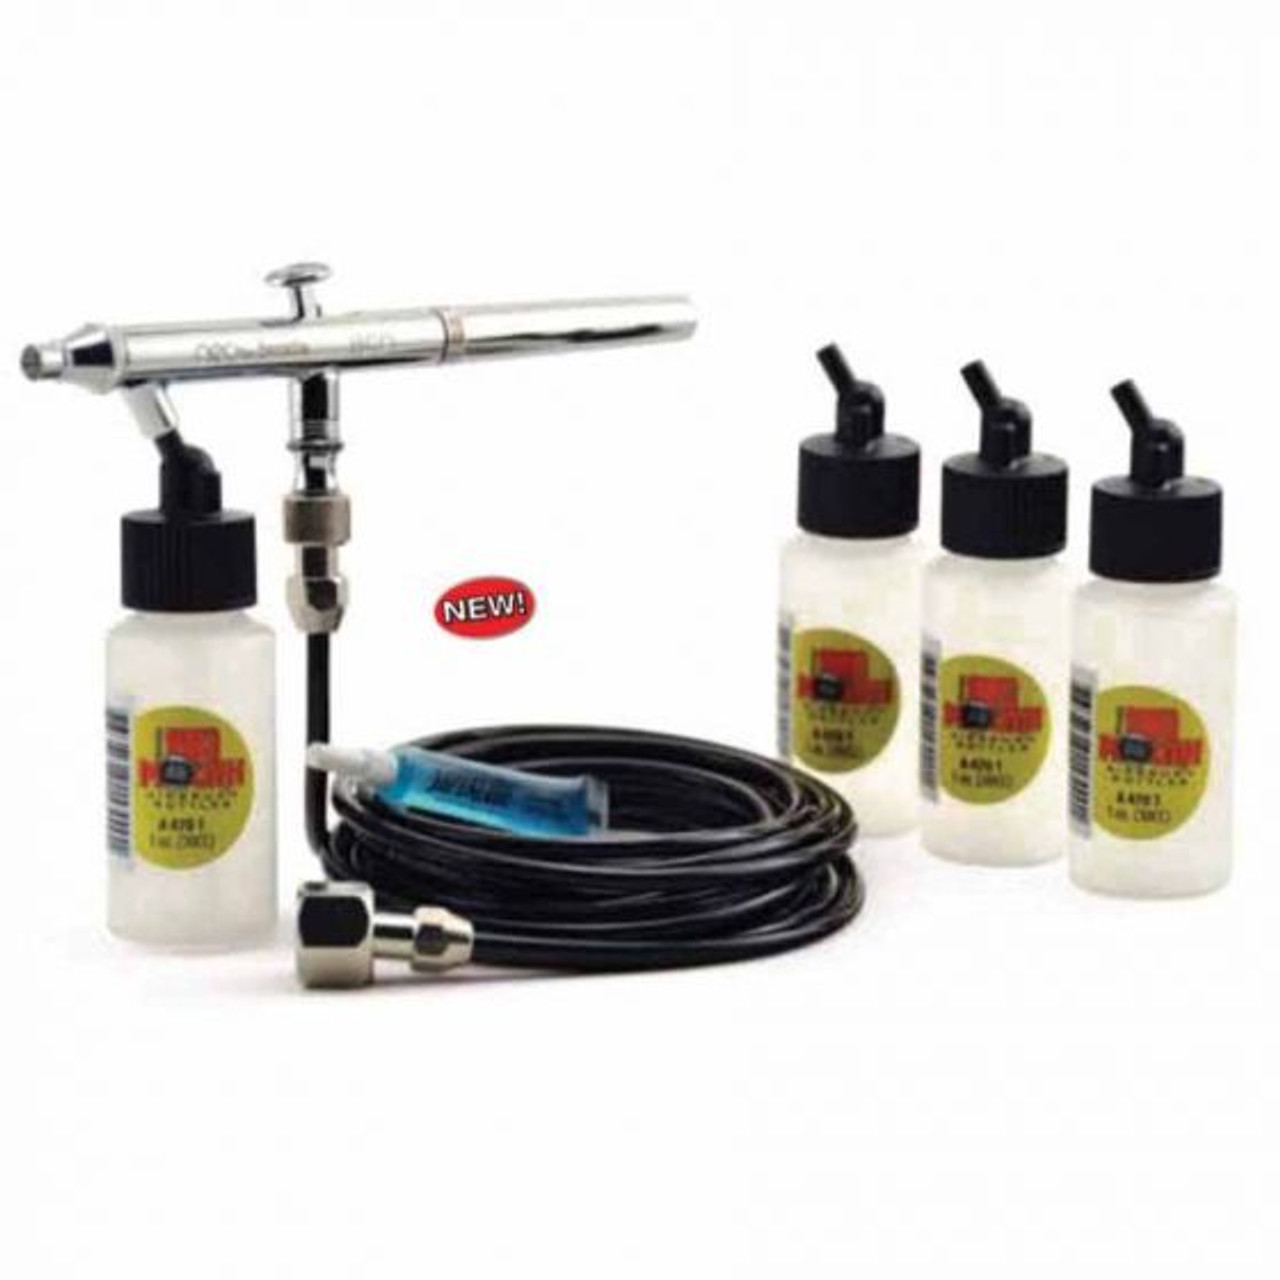 ANEST IWATA 4310 BCN NEO Series Dual Action Siphon Feed Airbrush Set, Brass